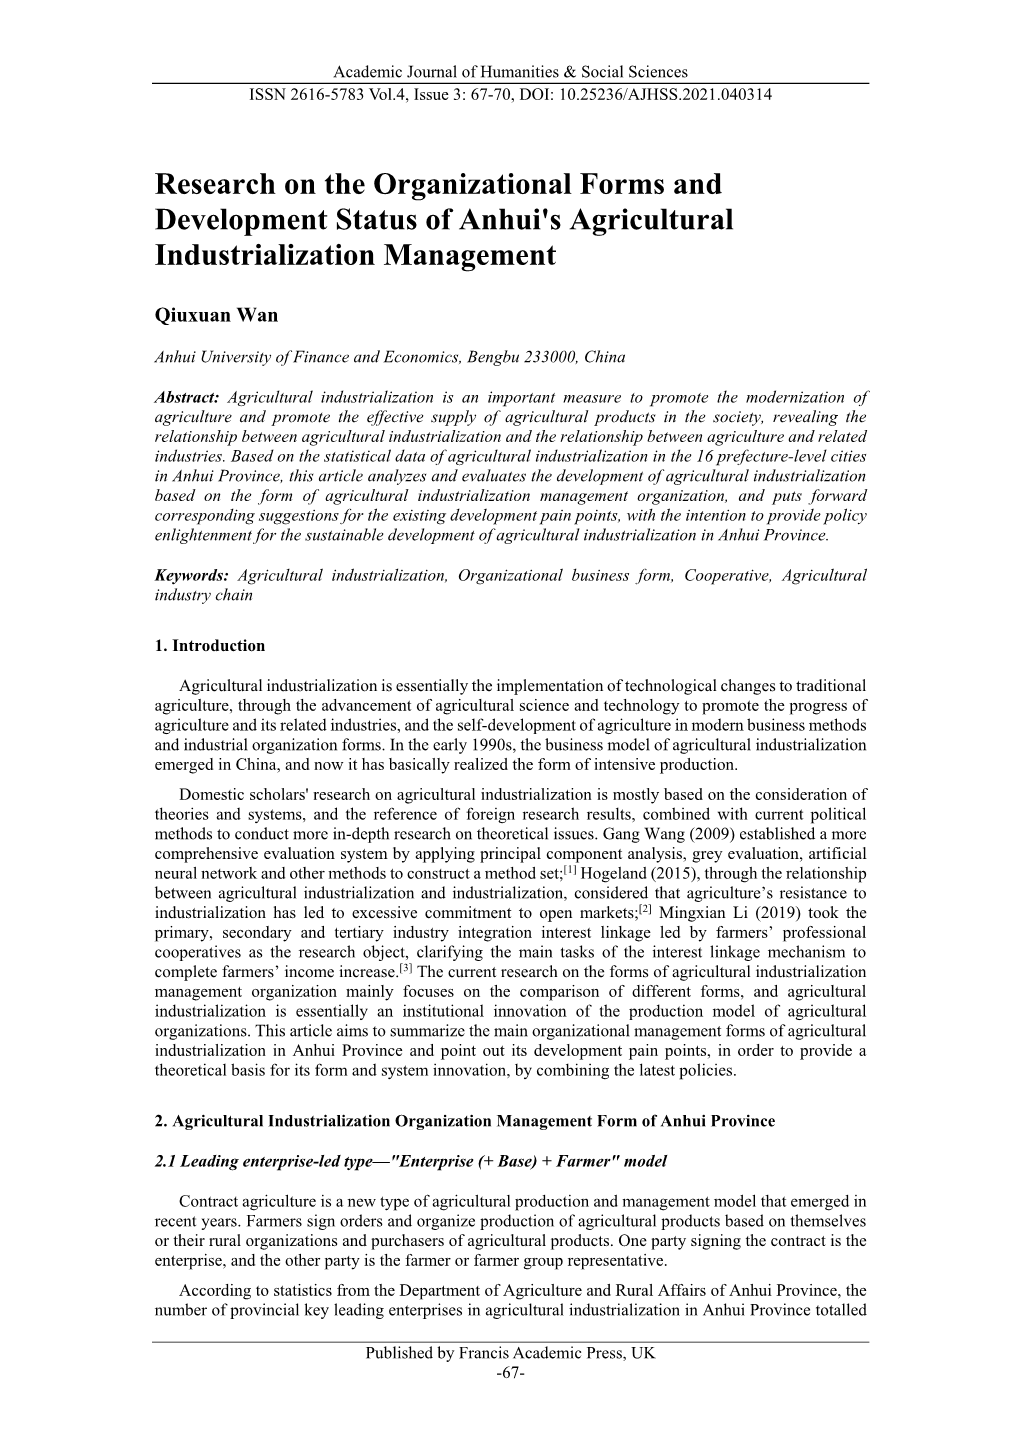 Research on the Organizational Forms and Development Status of Anhui's Agricultural Industrialization Management